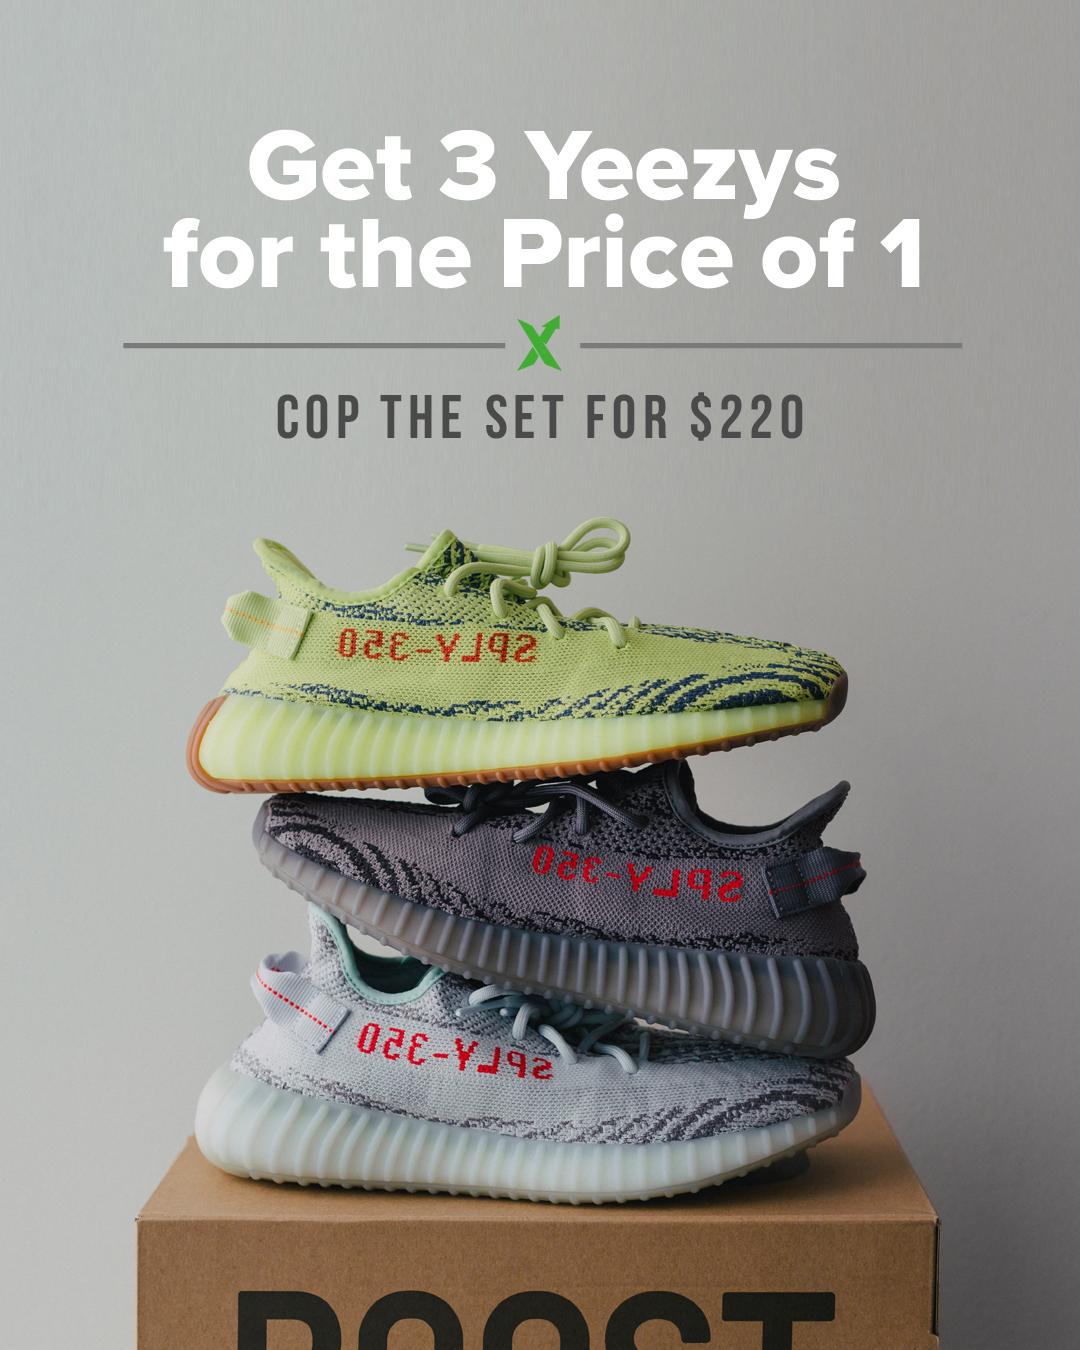 Get 3 Yeezys for the Price of 1